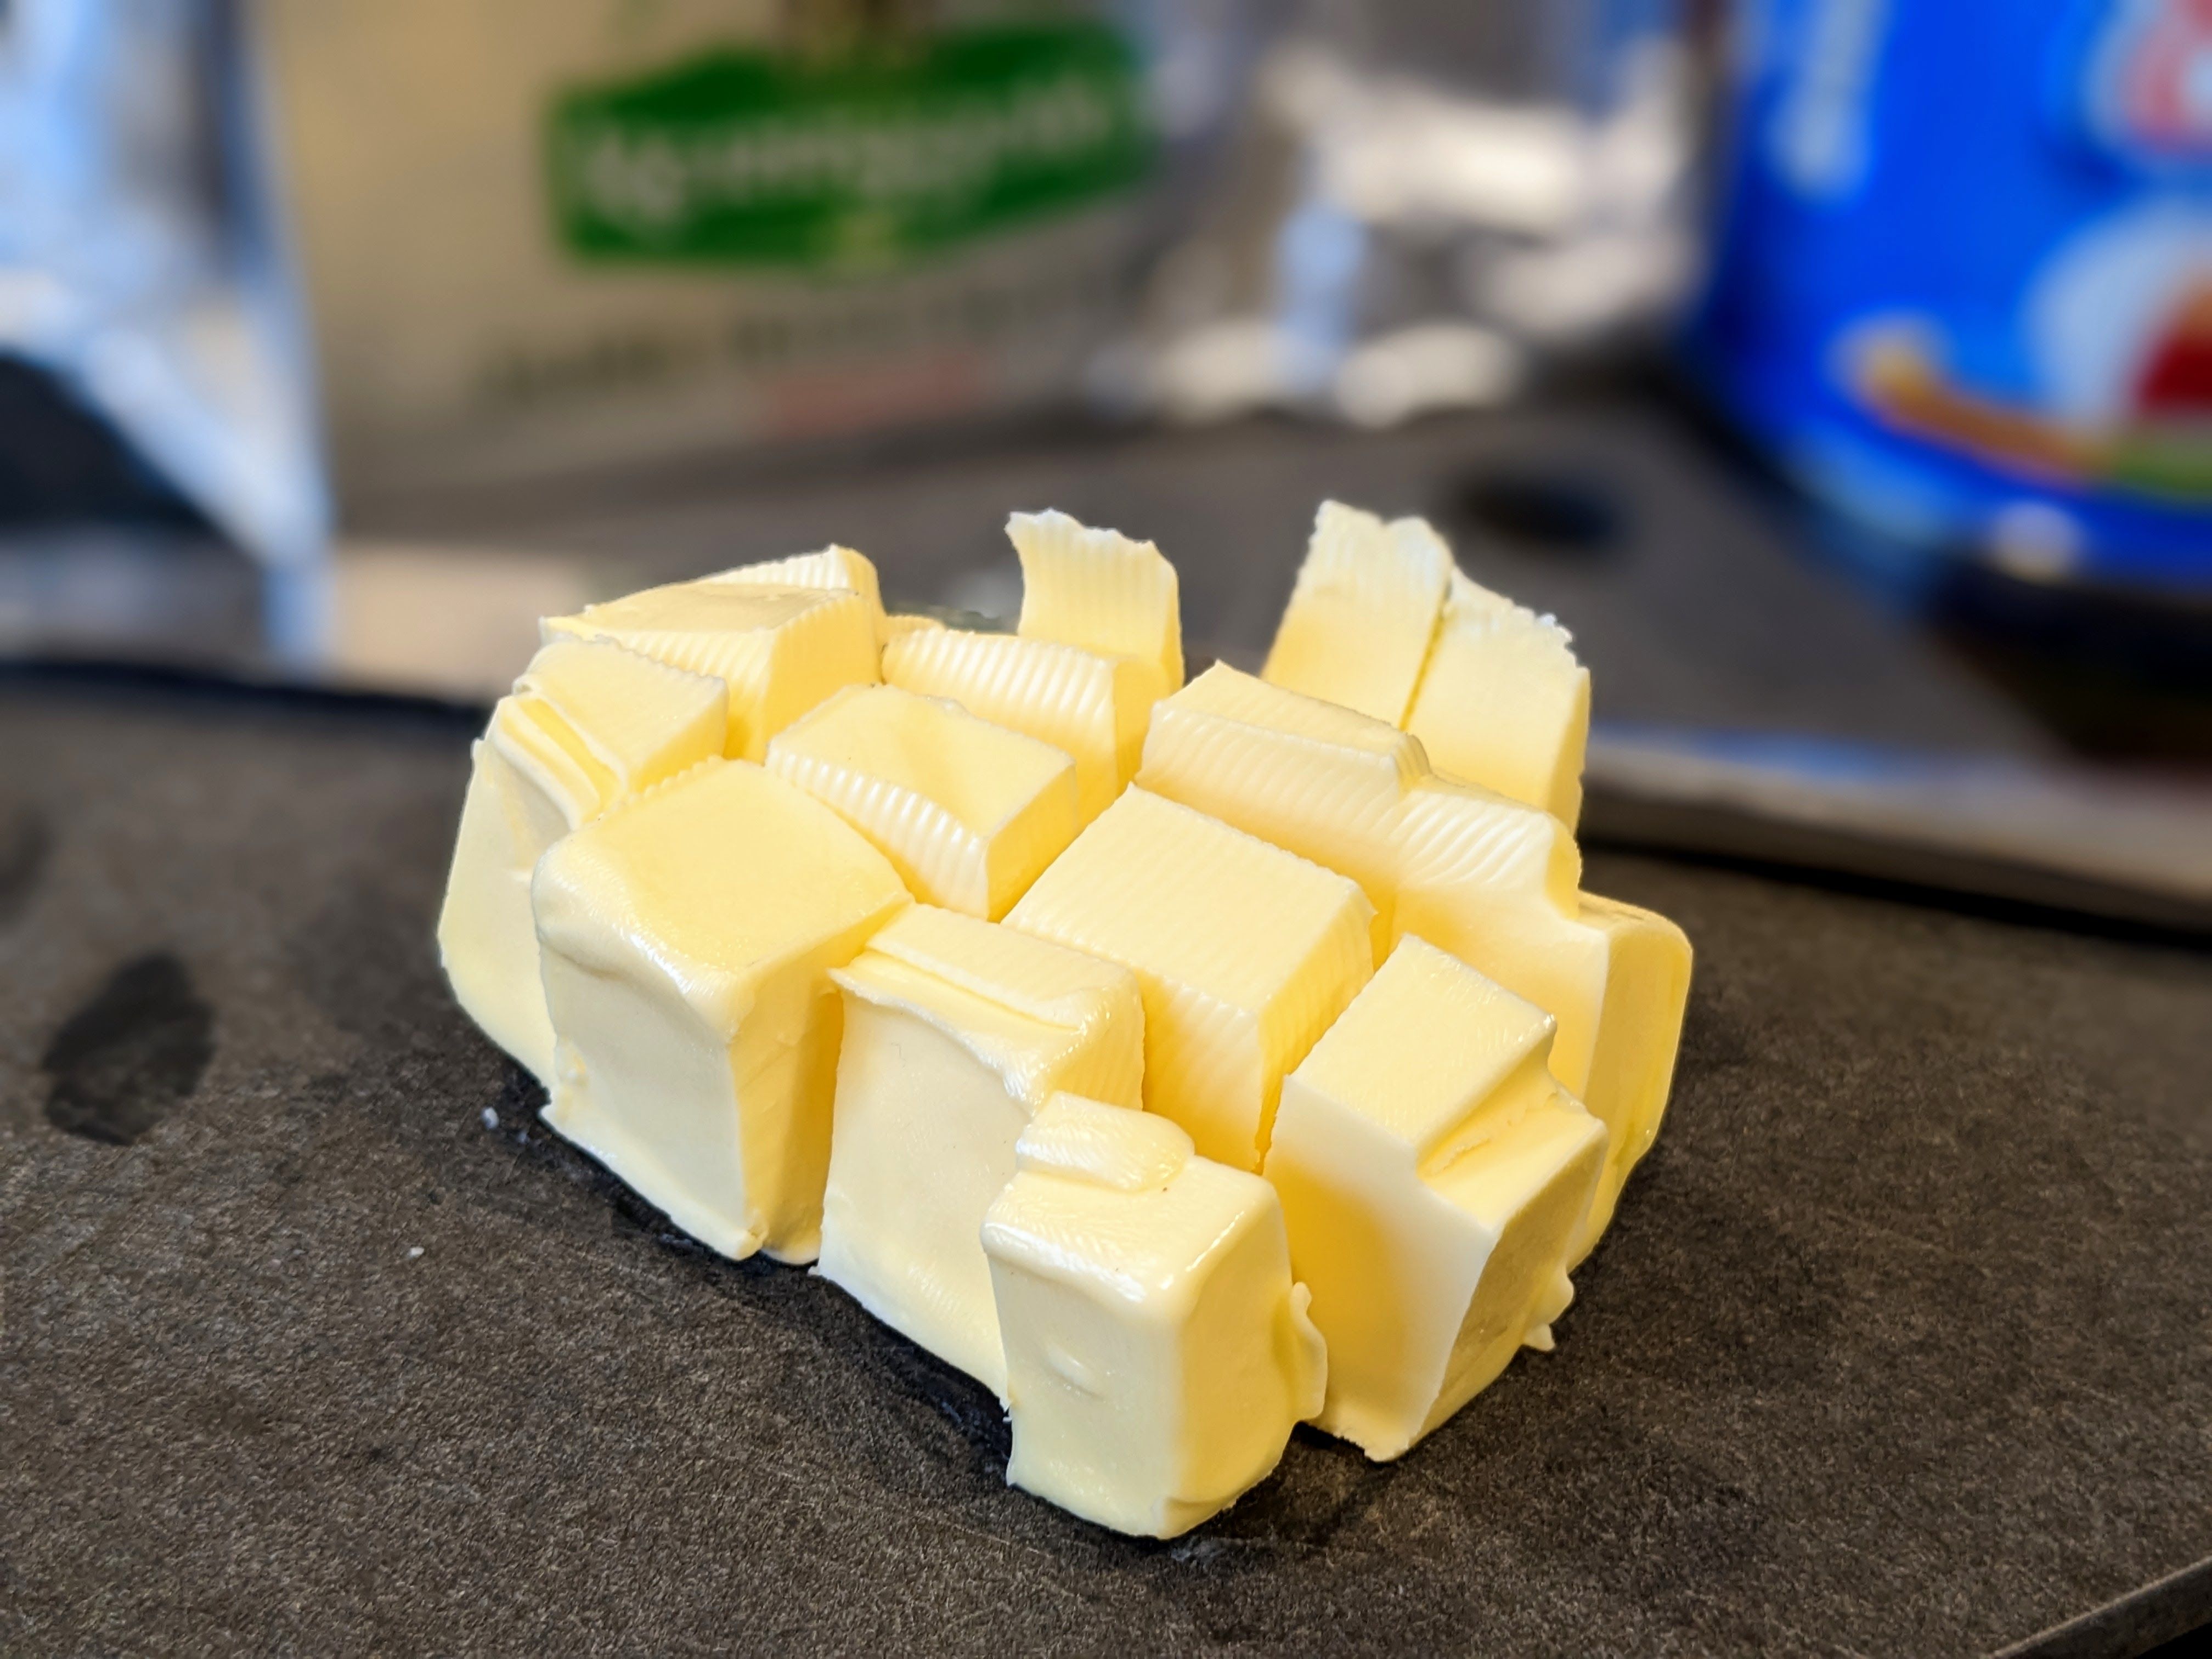 Cut up butter with Kerrigold wrapper in background